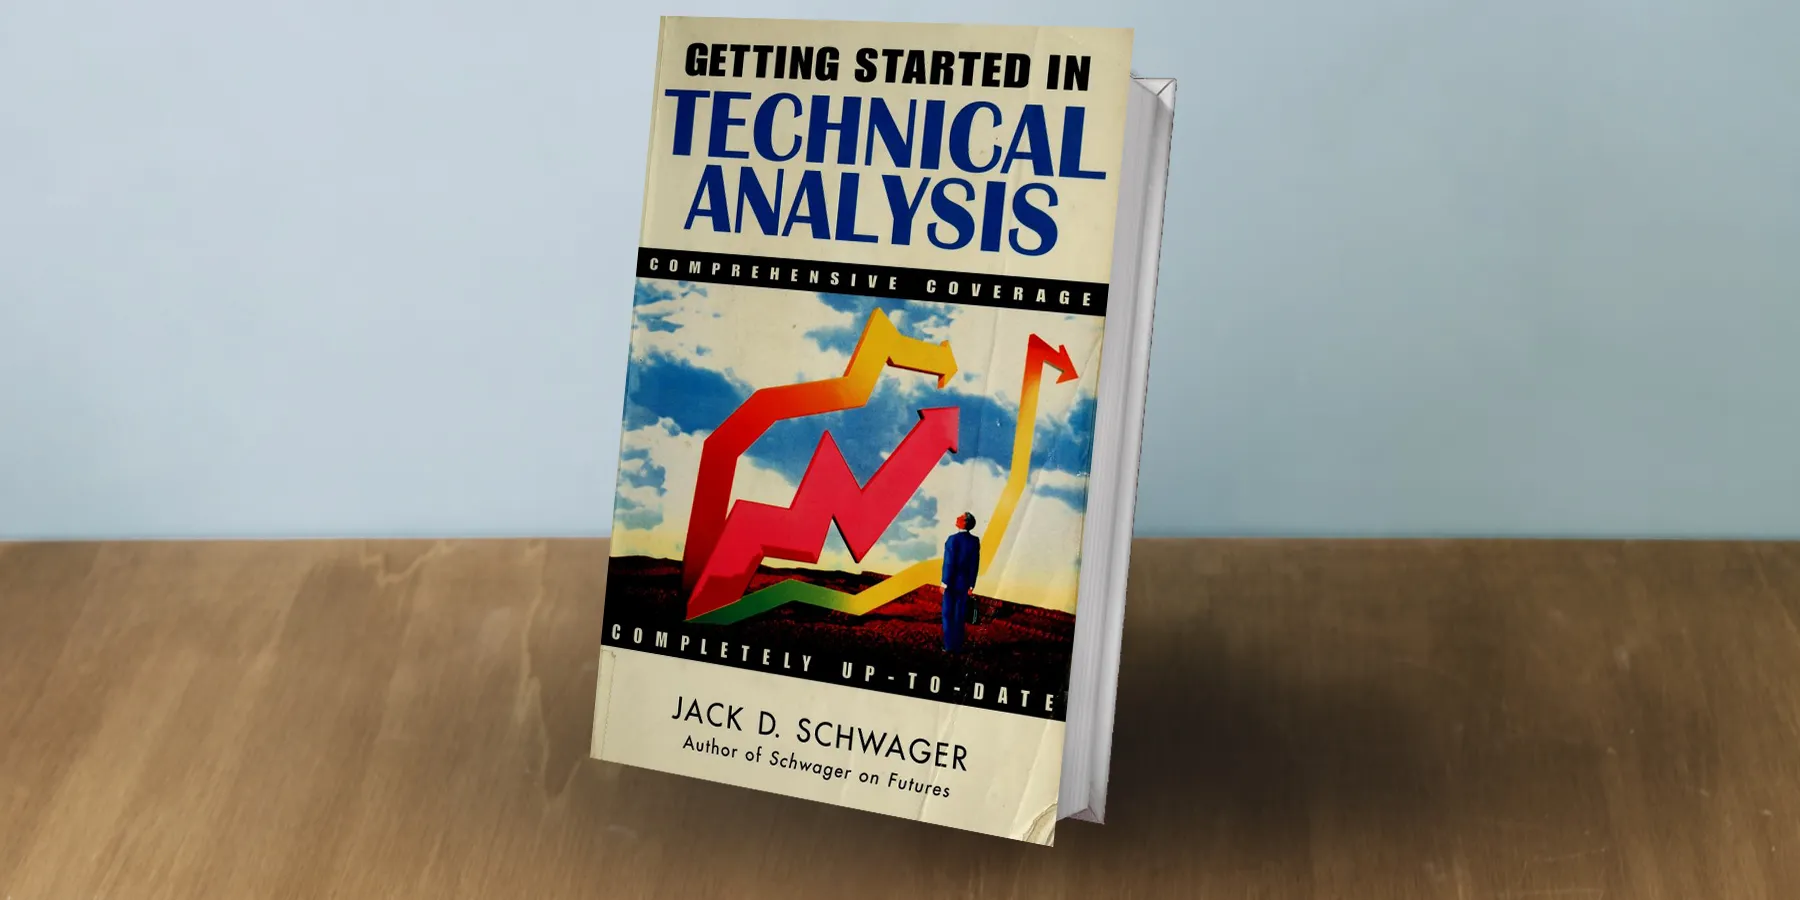 Getting Started in Technical Analysis"by Jack Schwager